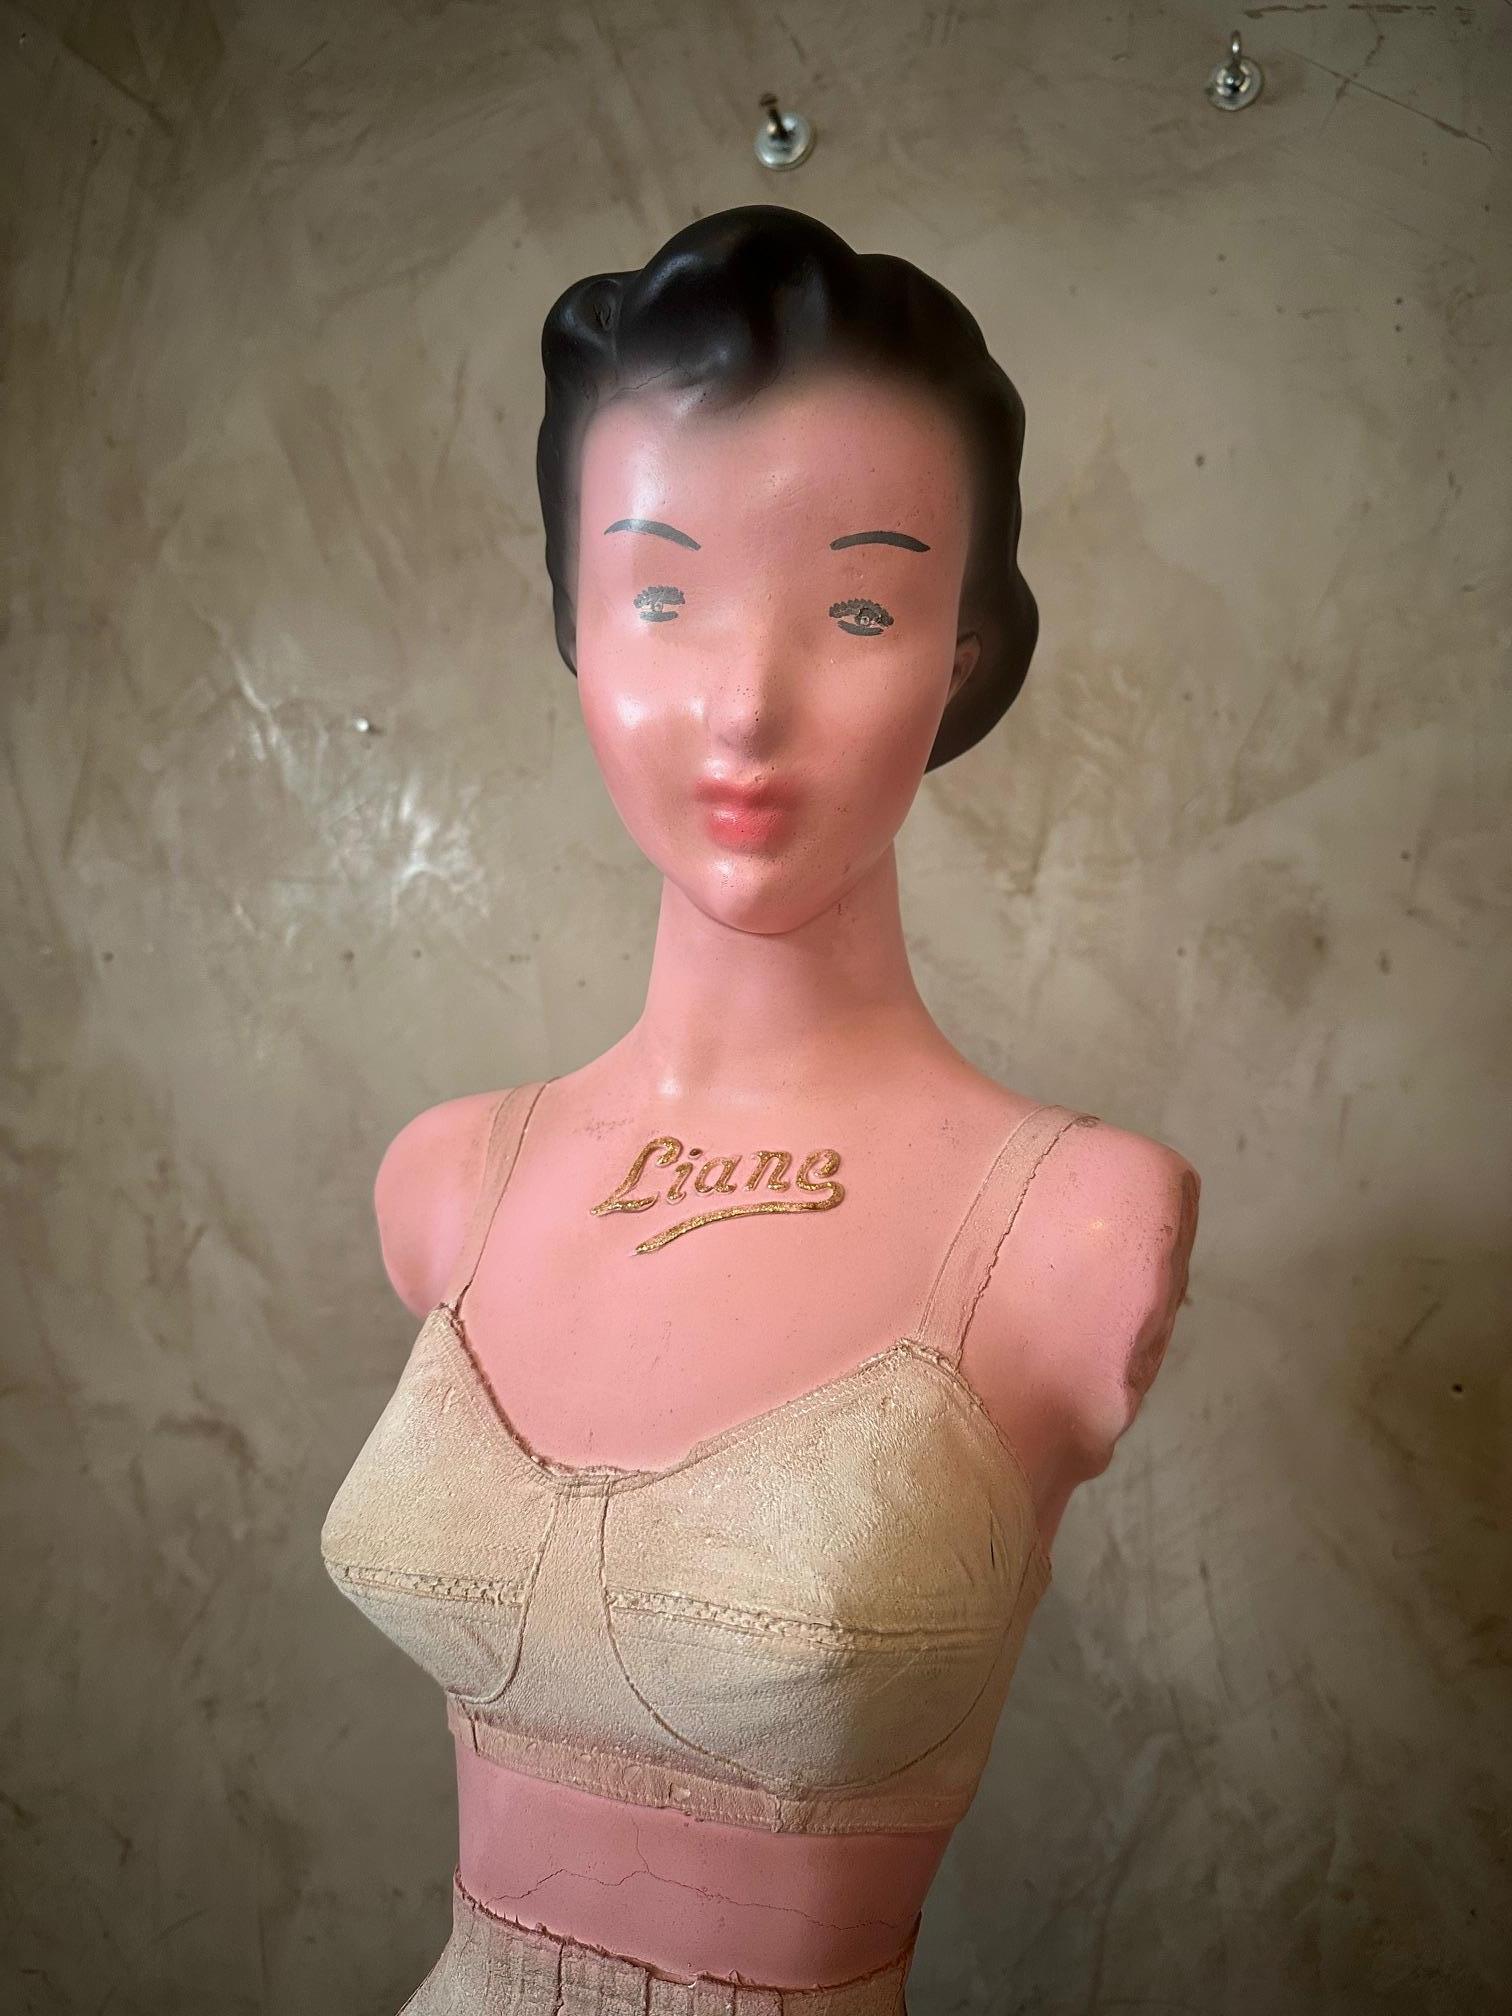 Mid-20th Century 20th century French Plaster Bust For Dior Advertisement, 1950s For Sale